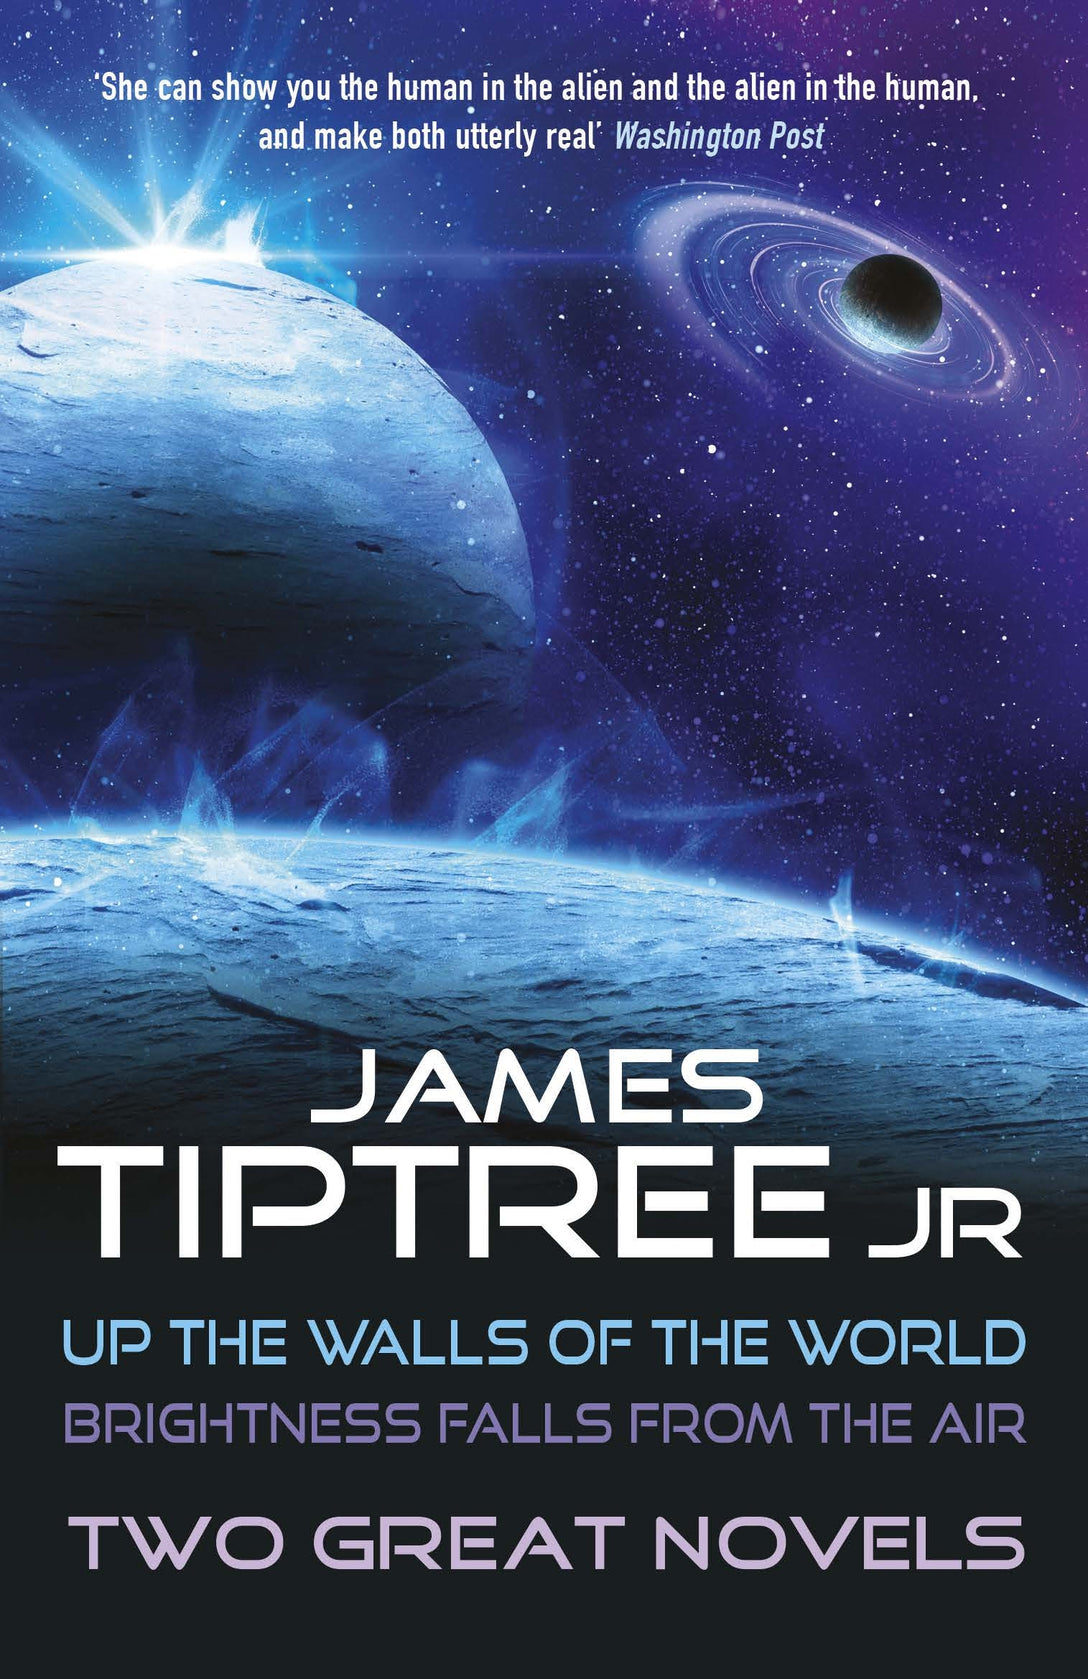 Two Great Novels by James Tiptree Jr.